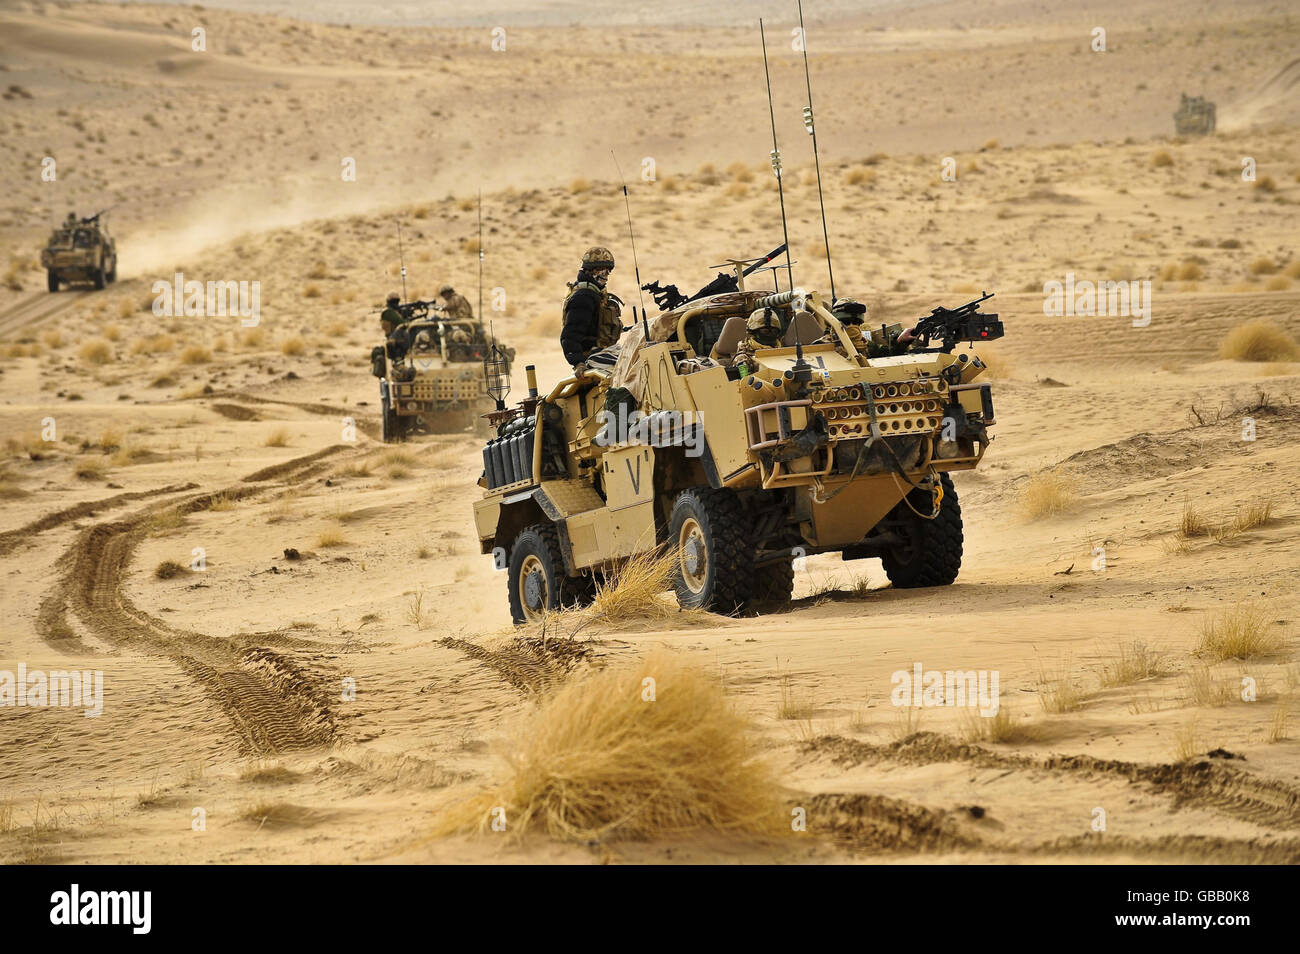 British Army Jackals on patrol through the Eastern Desert in Helmand Province, Afghanistan. Stock Photo